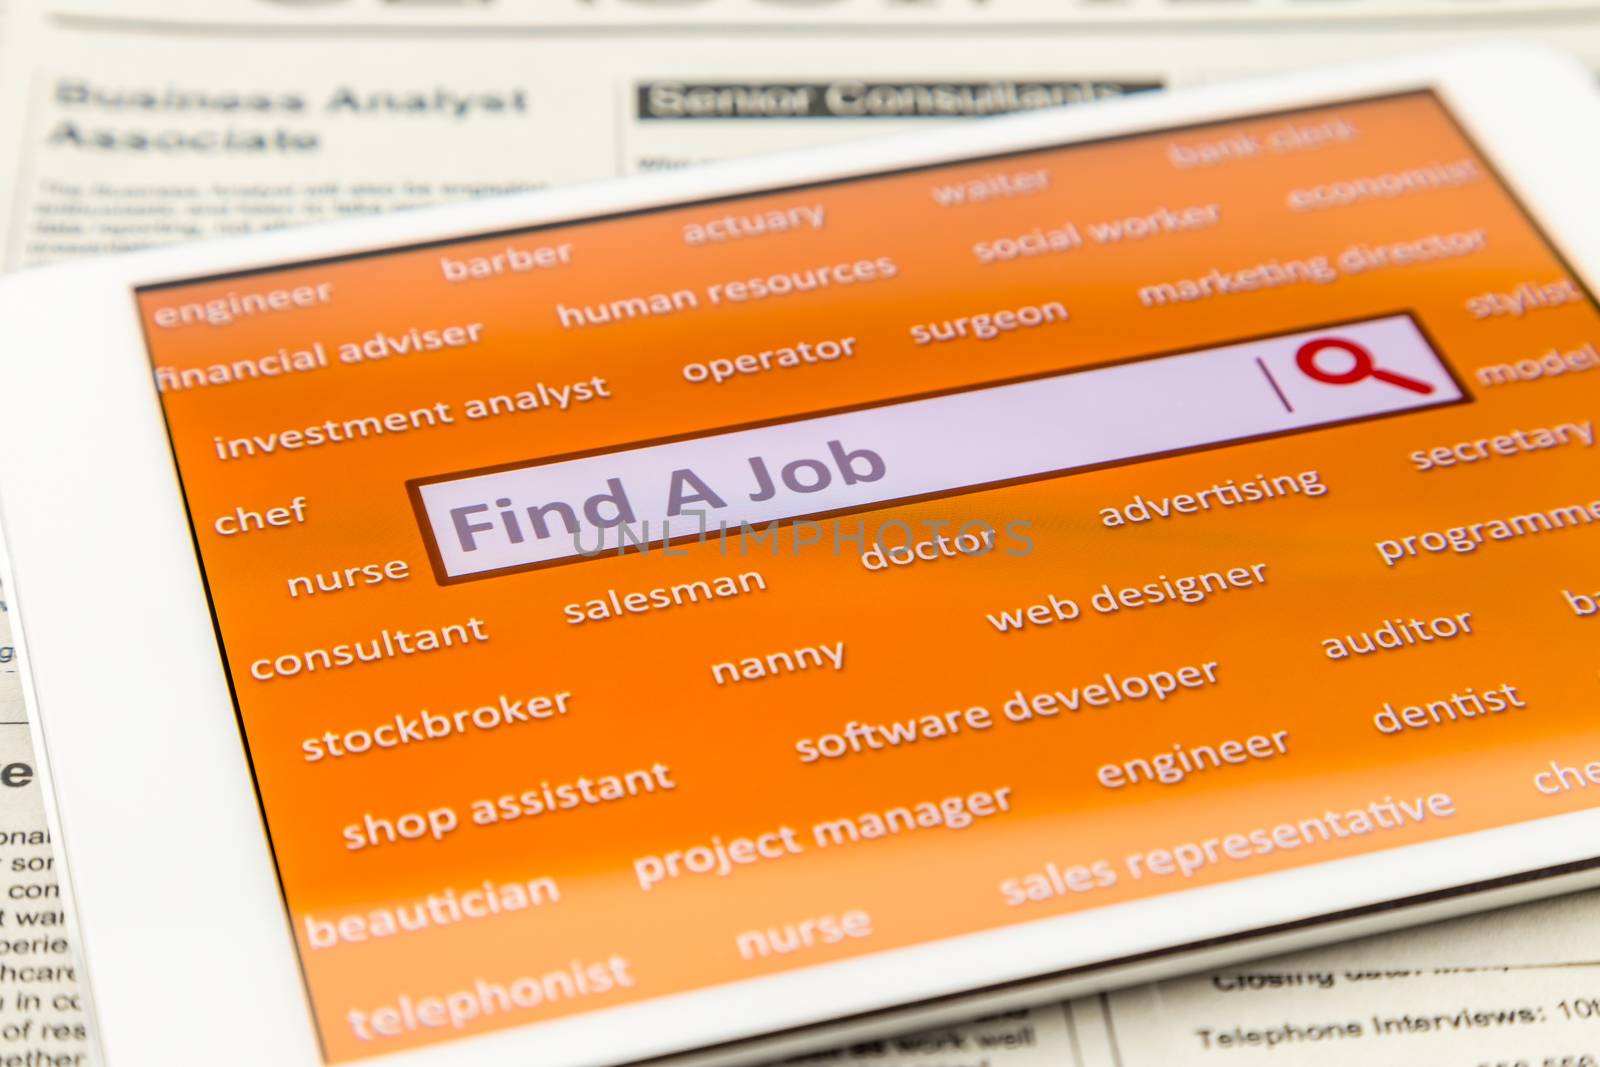 Find a job with online job search engine by vinnstock